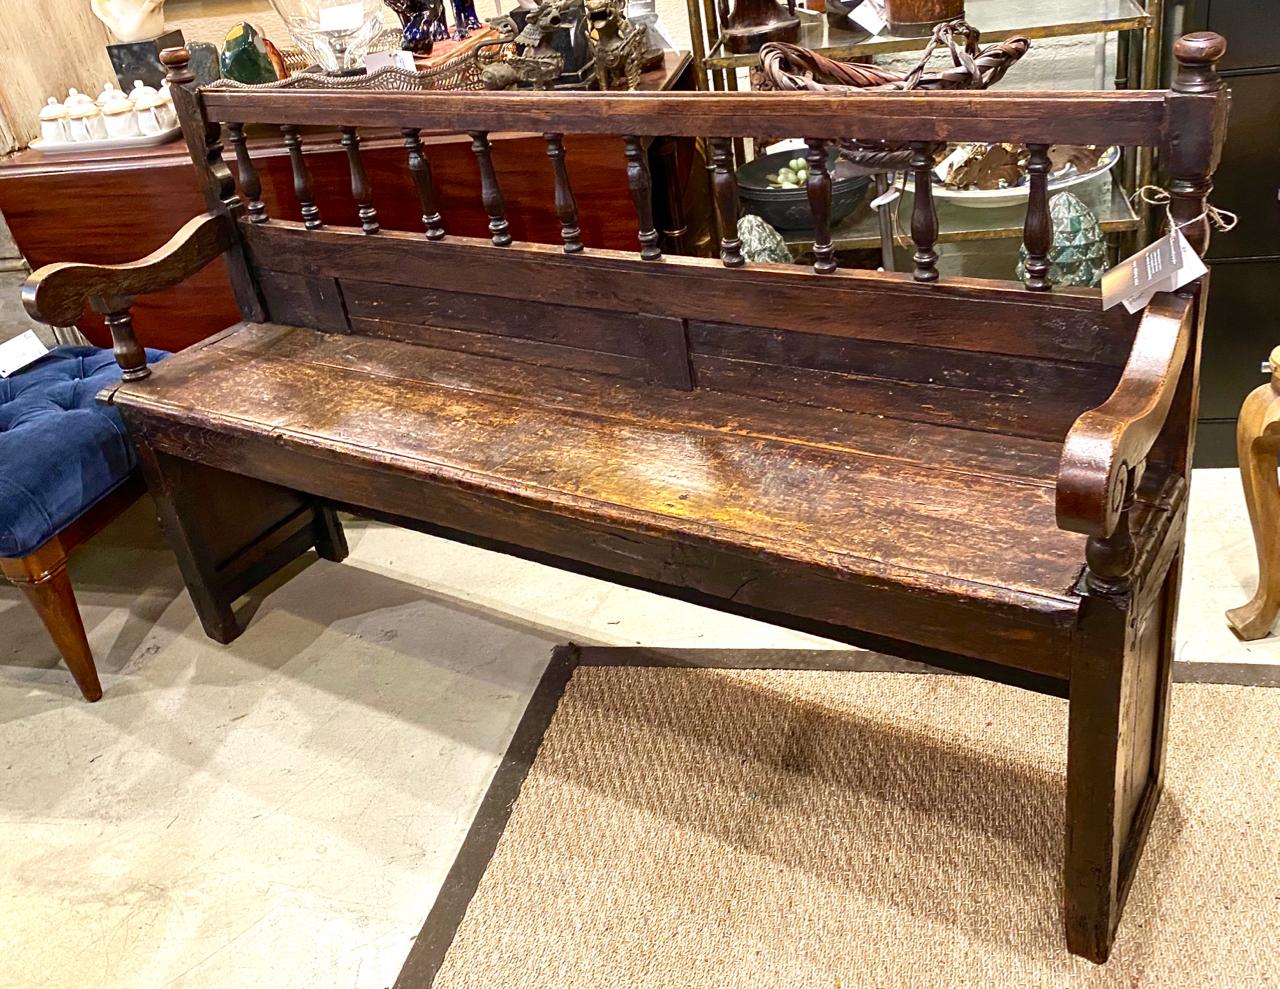 This is a highly decorative walnut farm house bench that dates to the late 18th or early 19th century bench that is most probably French in origin. The bench was fabricated using discarded wood elements from other projects.